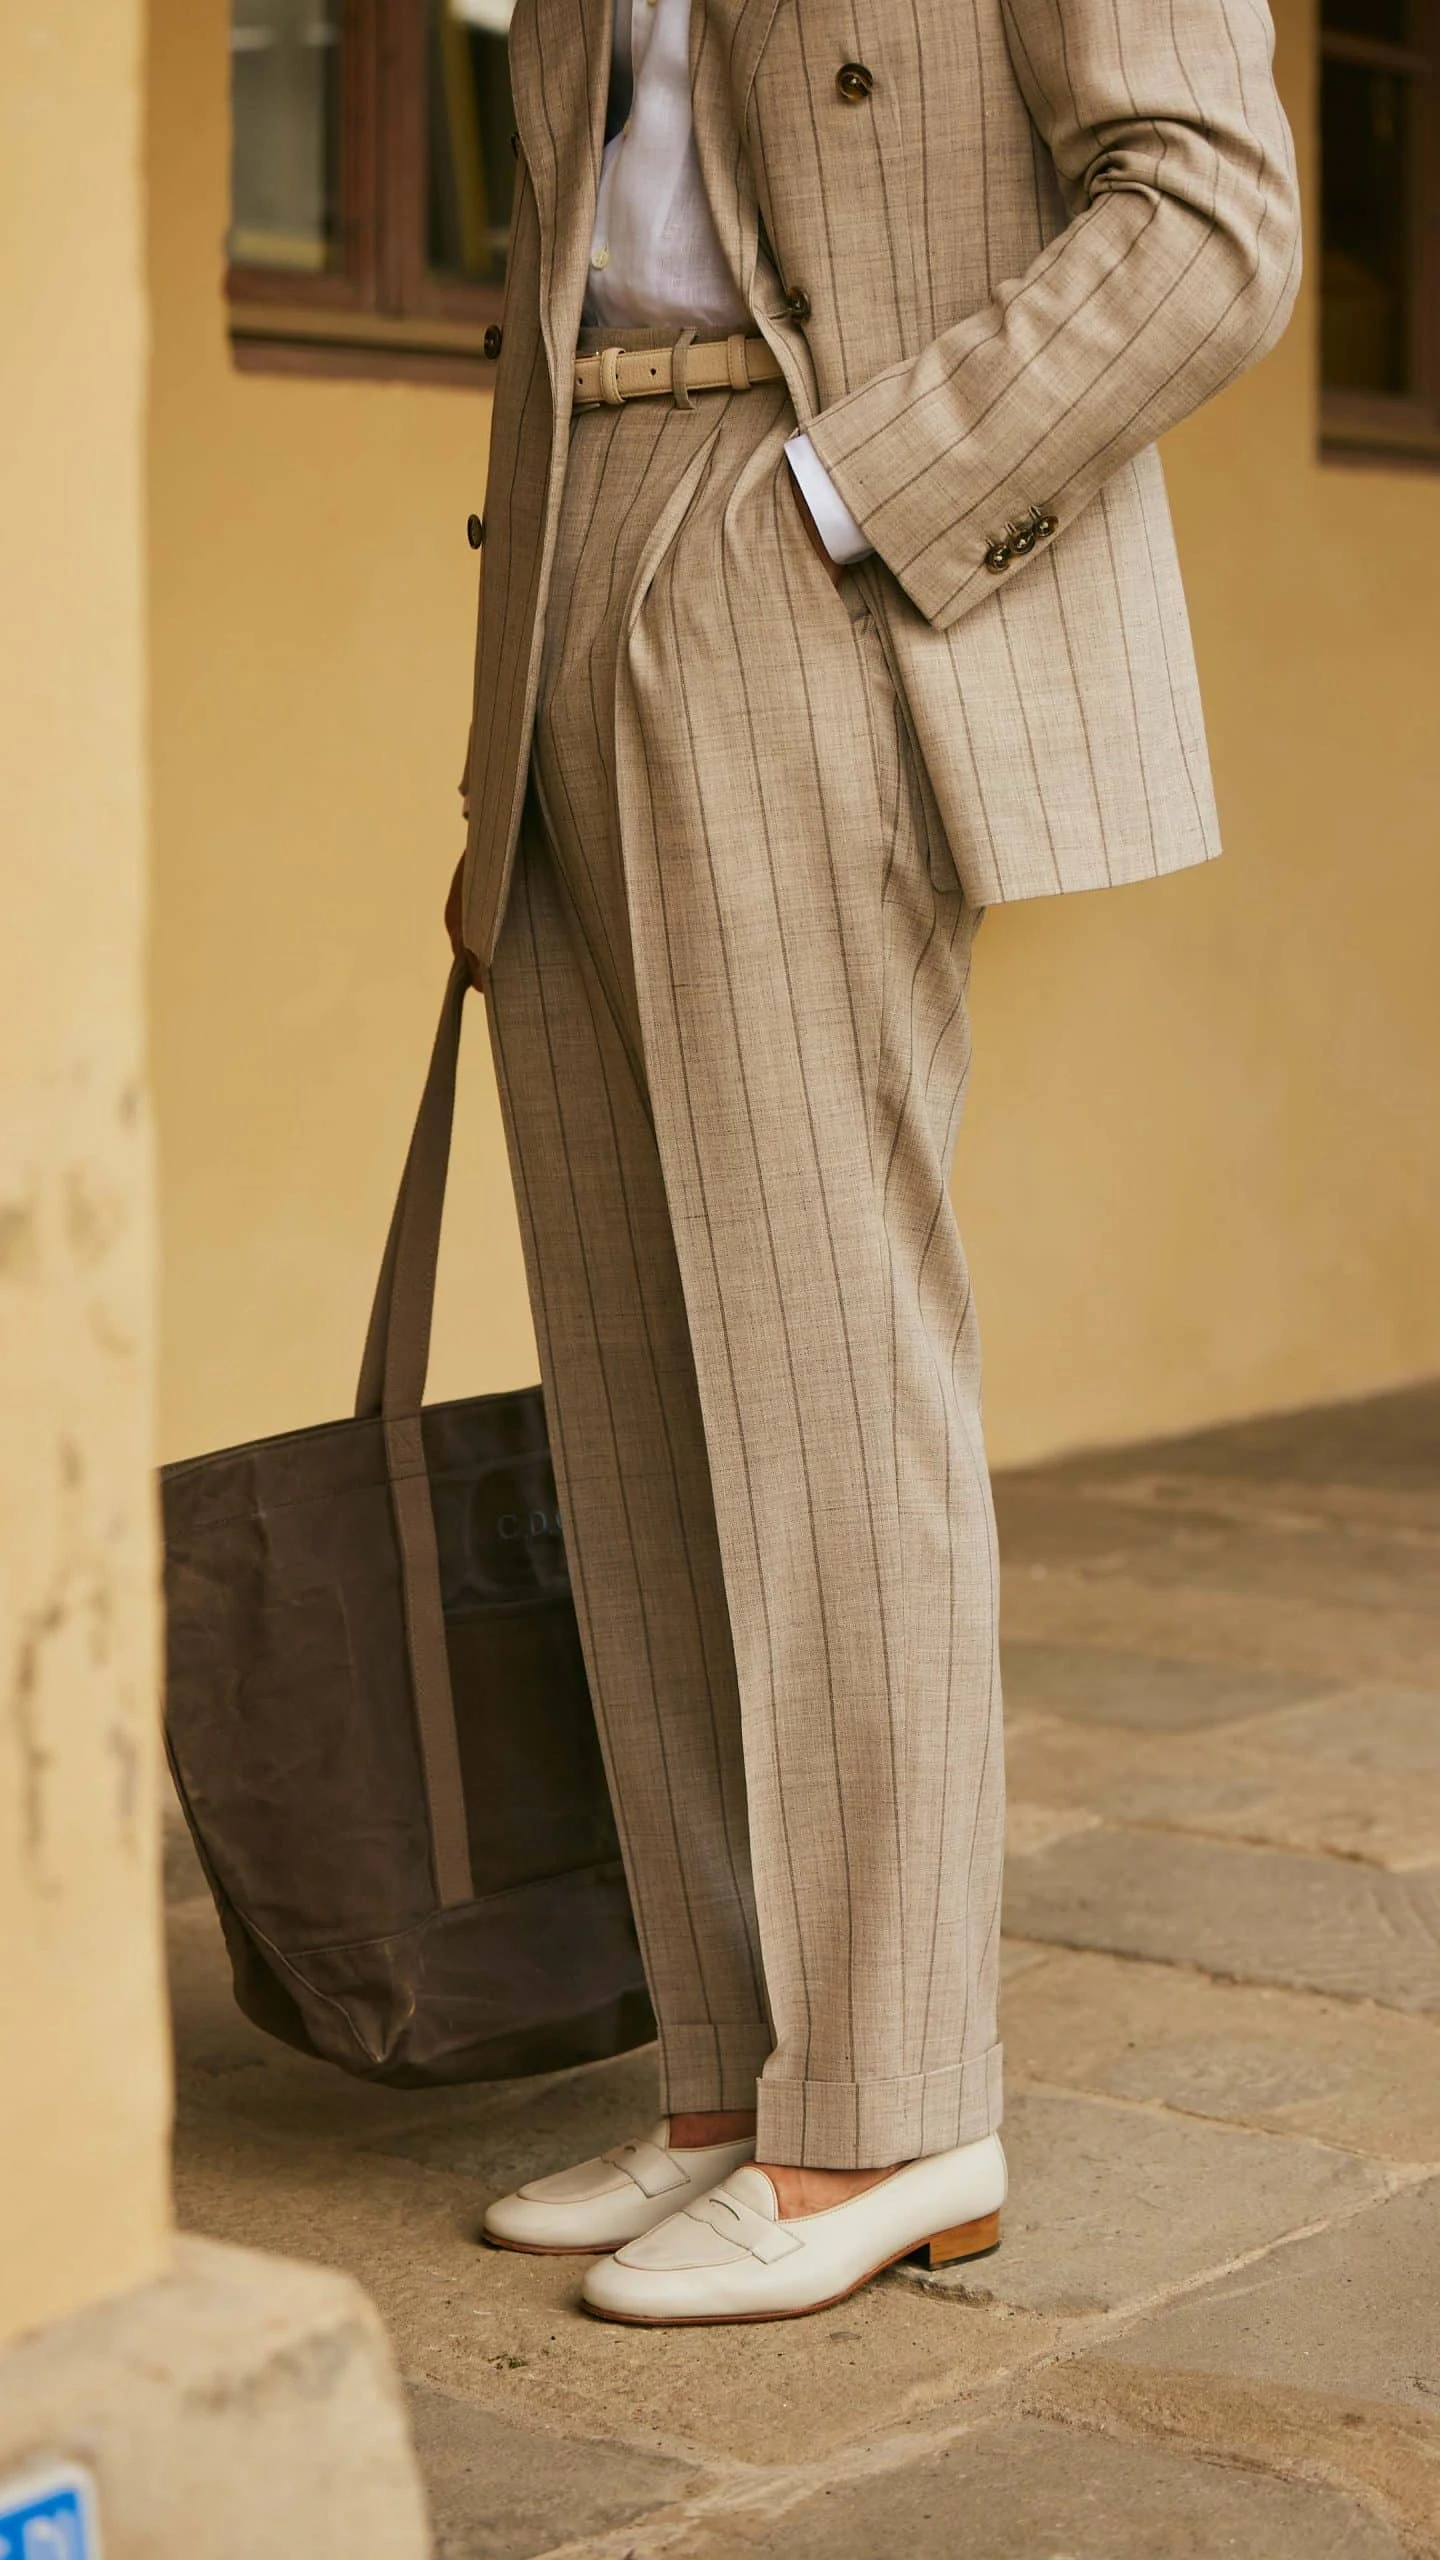 carlos domord at pitti uomo wearing taupe beige striped suit and a linen camp collar shirt by mond